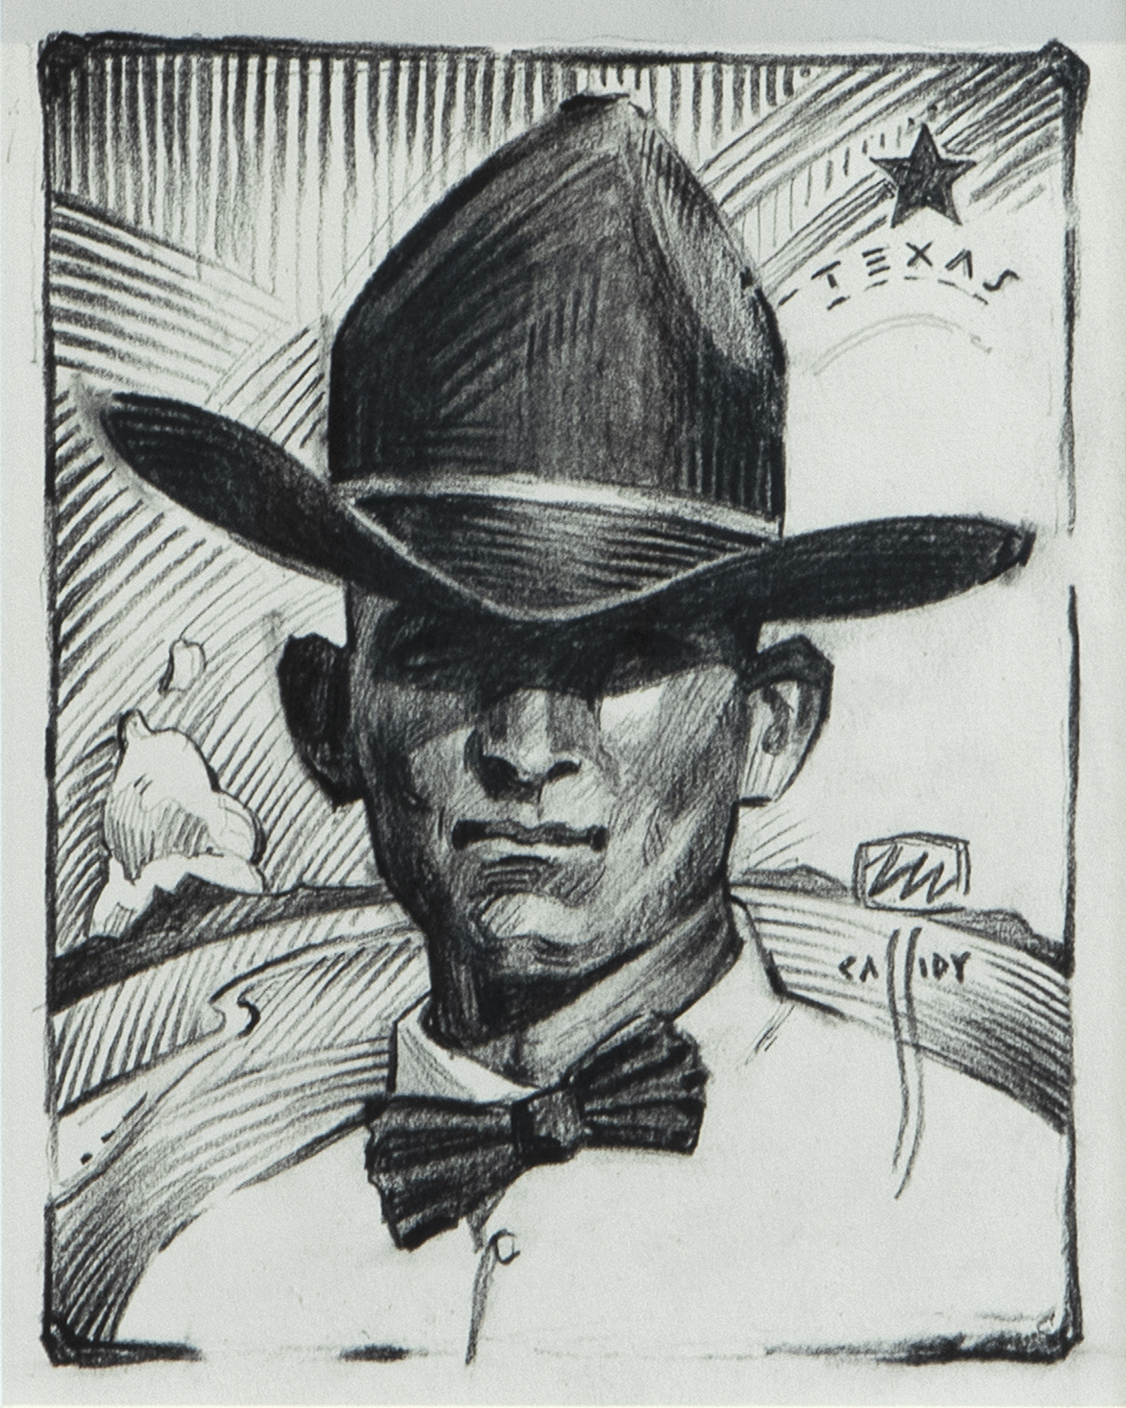 
		                					Michael Cassidy		                																	
																											<i>Texas Cowpoke,</i>  
																																								2021, 
																																								charcoal pencil on paper, 
																																								8 x 6 1/2 inches 
																								
		                				